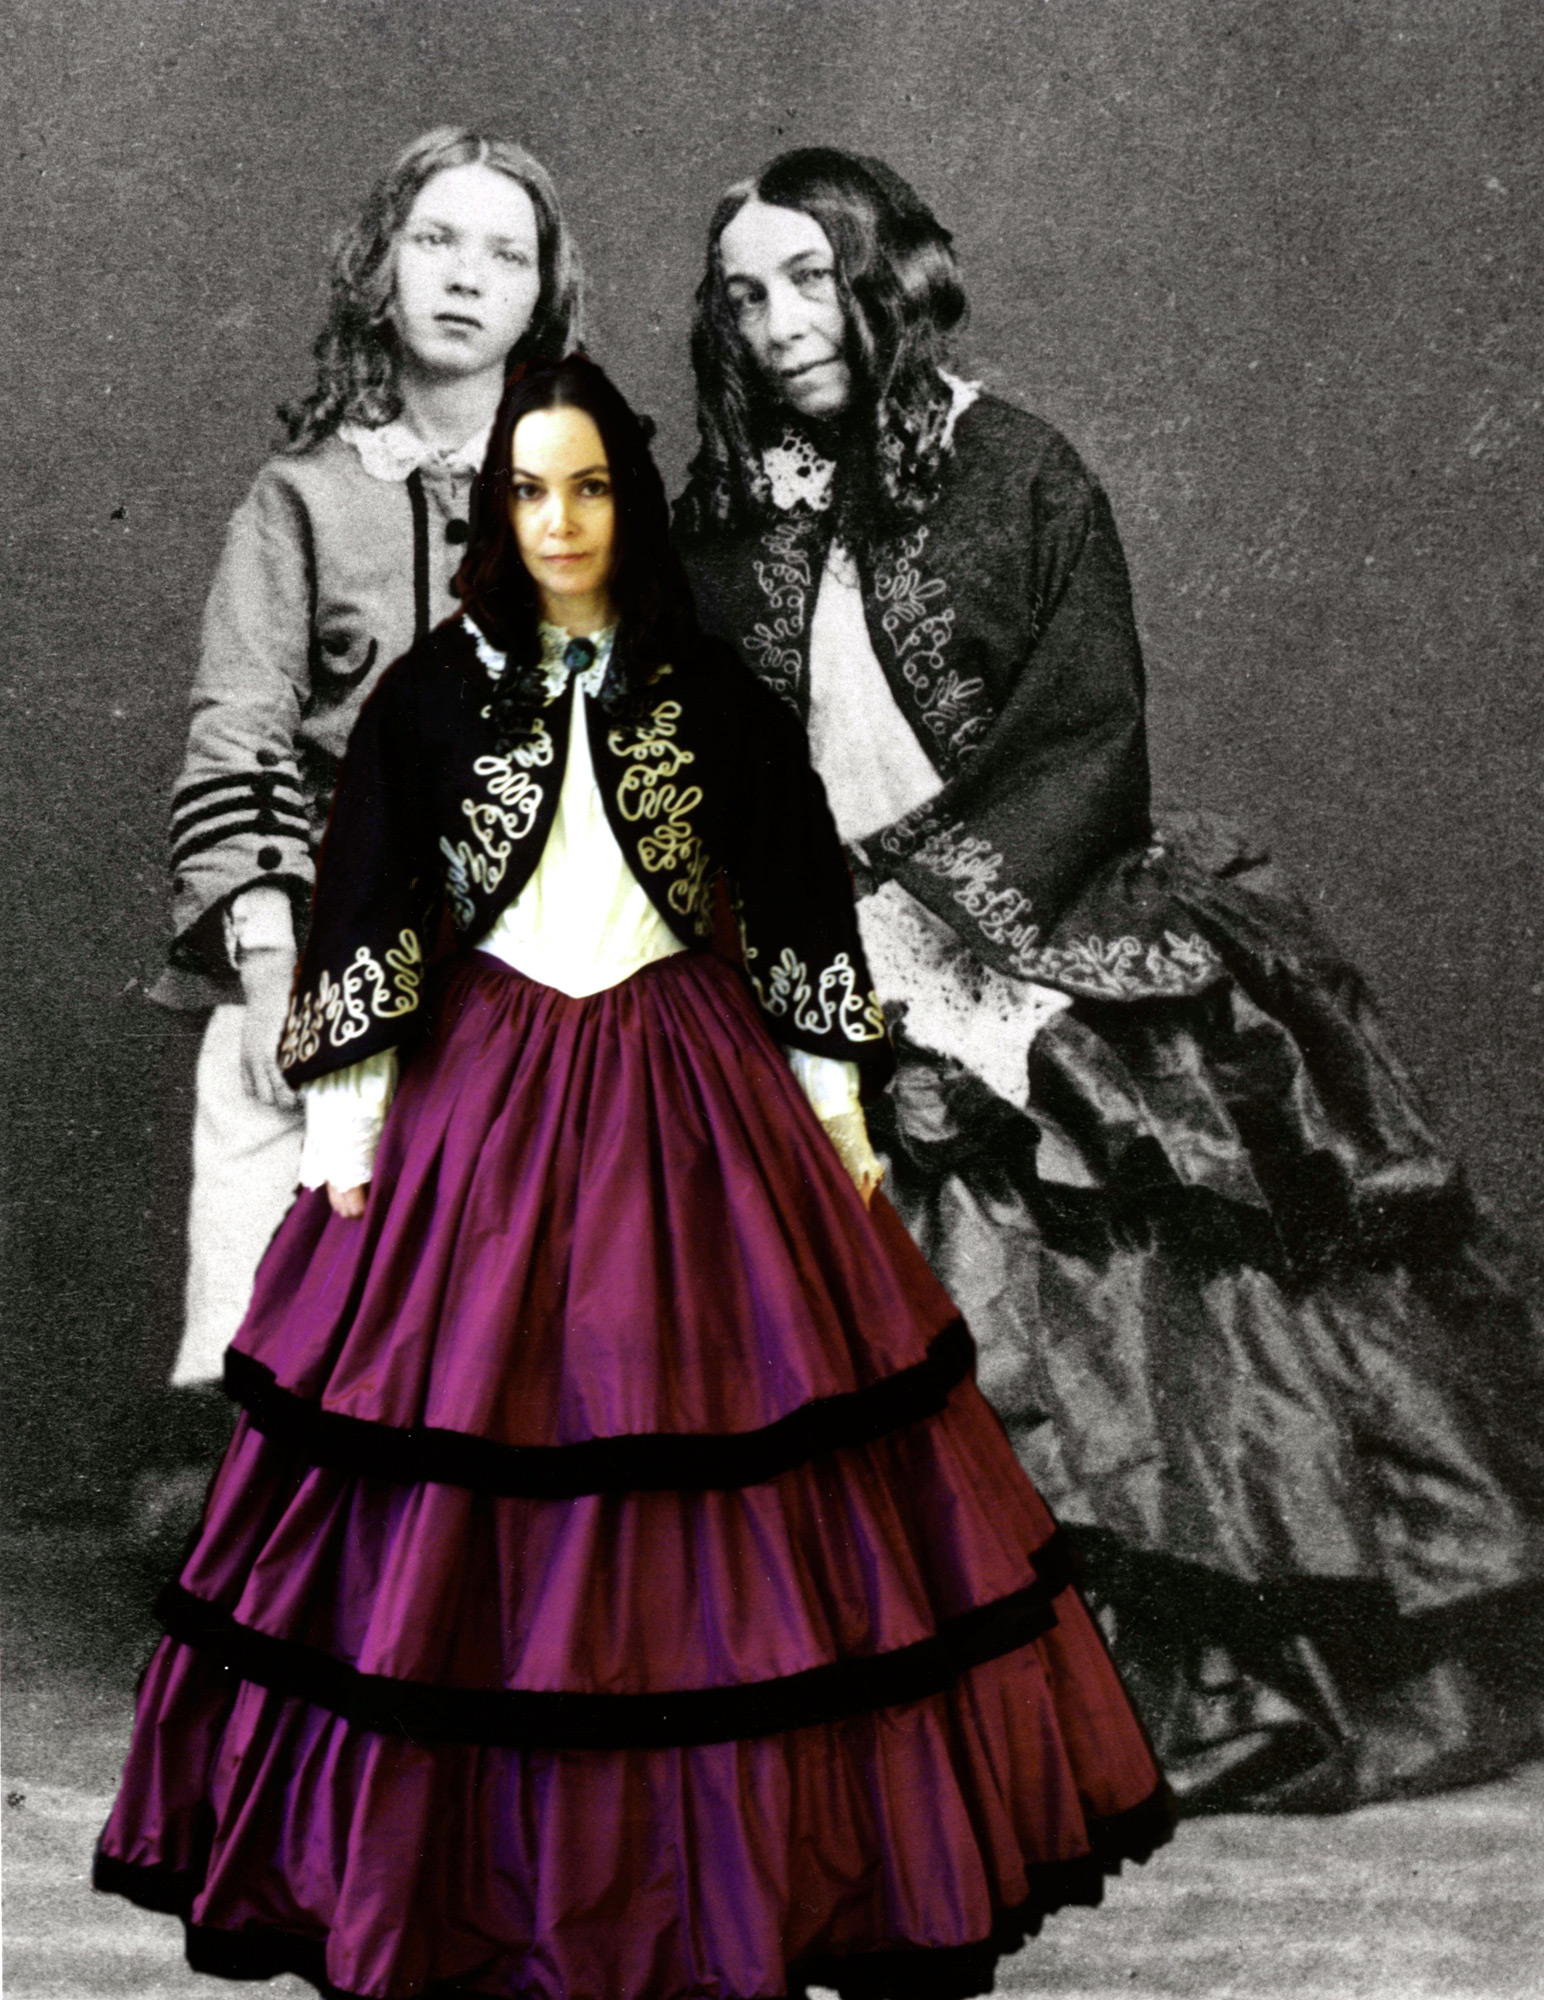 Neri pictured superimposed over Variant A wearing the reproductions of her 1860 garments